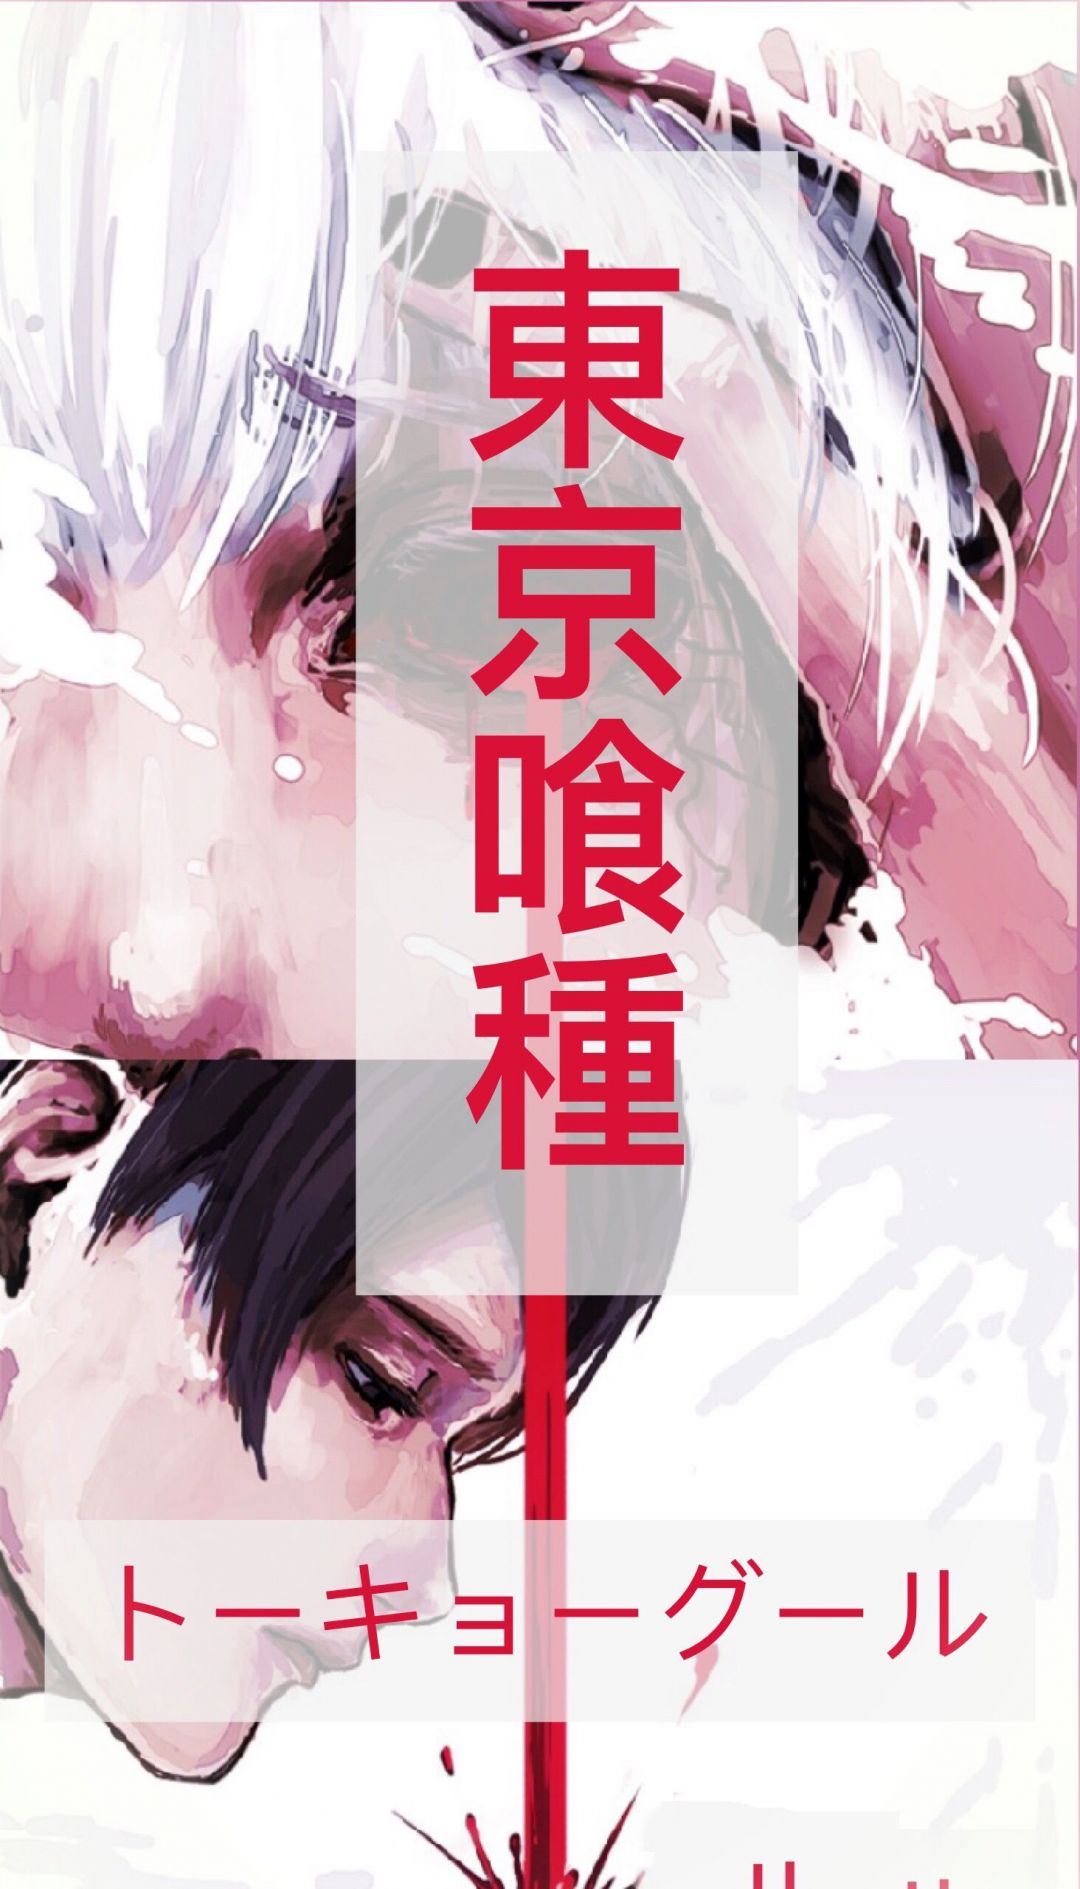 Tokyo Ghoul Iphone - Aesthetic Tokyo Ghoul Wallpaper Iphone , HD Wallpaper & Backgrounds